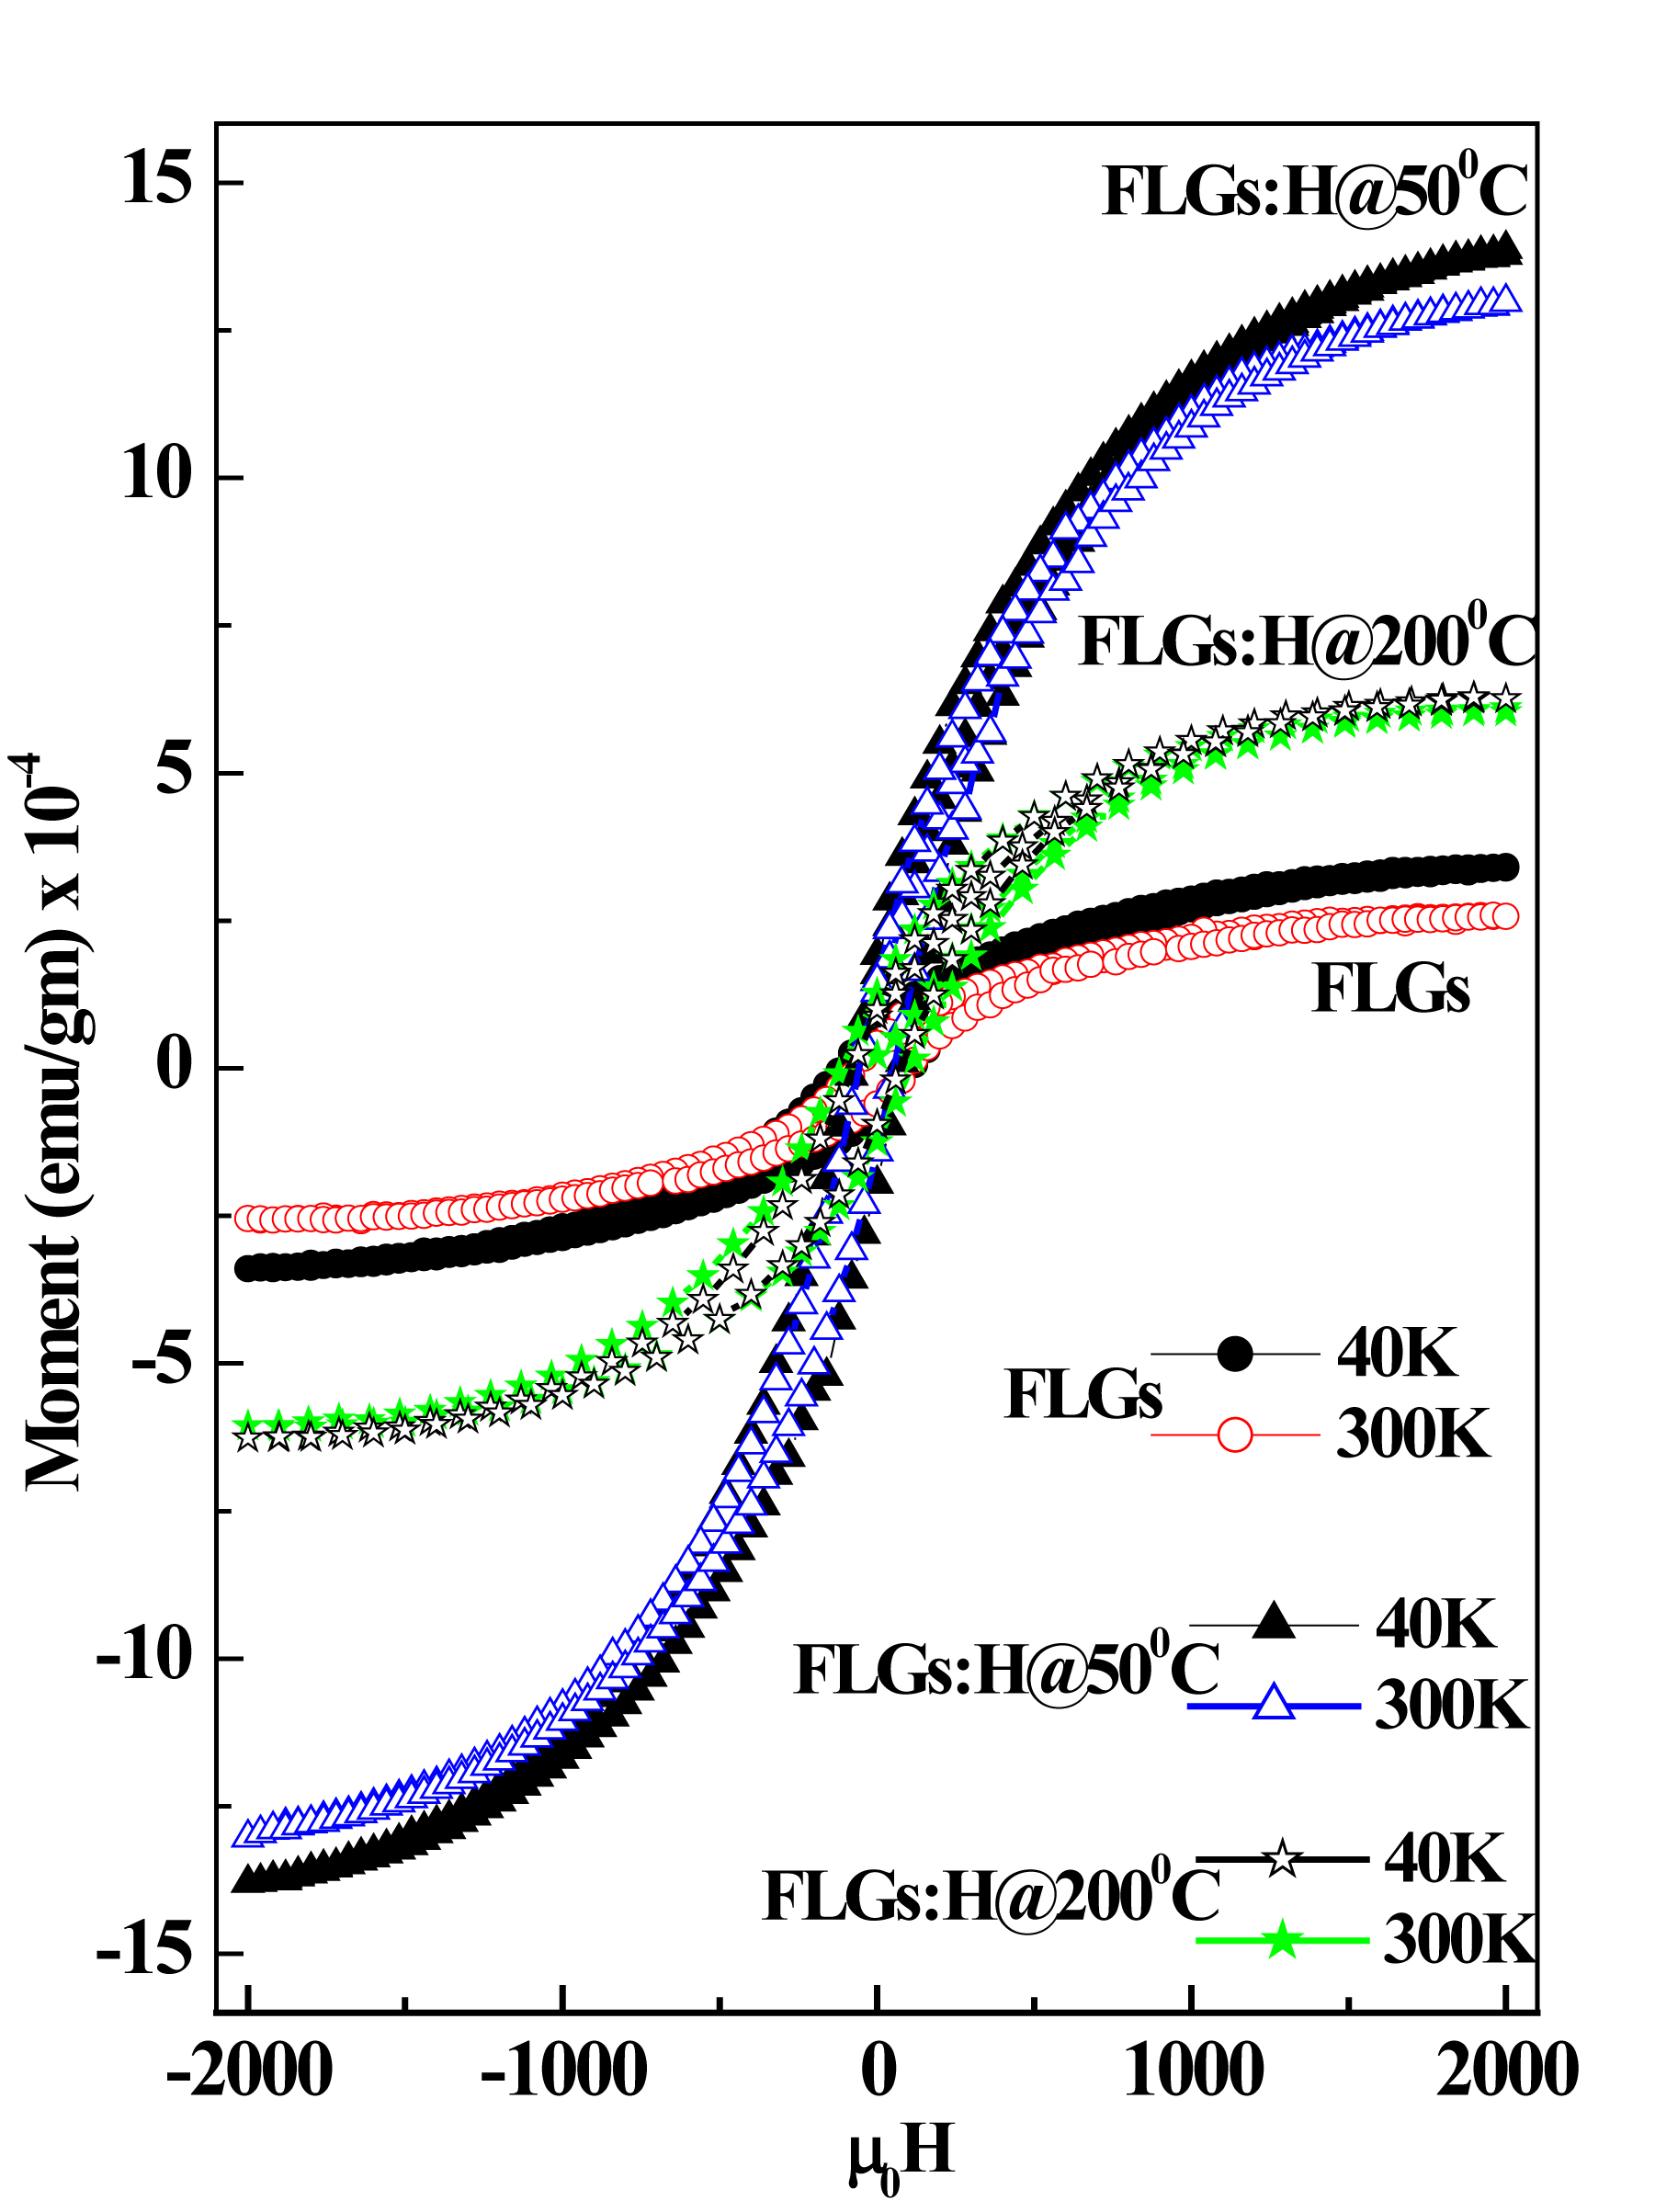 Figure 6. Magnetic hysteresis loops obtained for FLG and FLG:H samples at 300K and 40K, respectively.